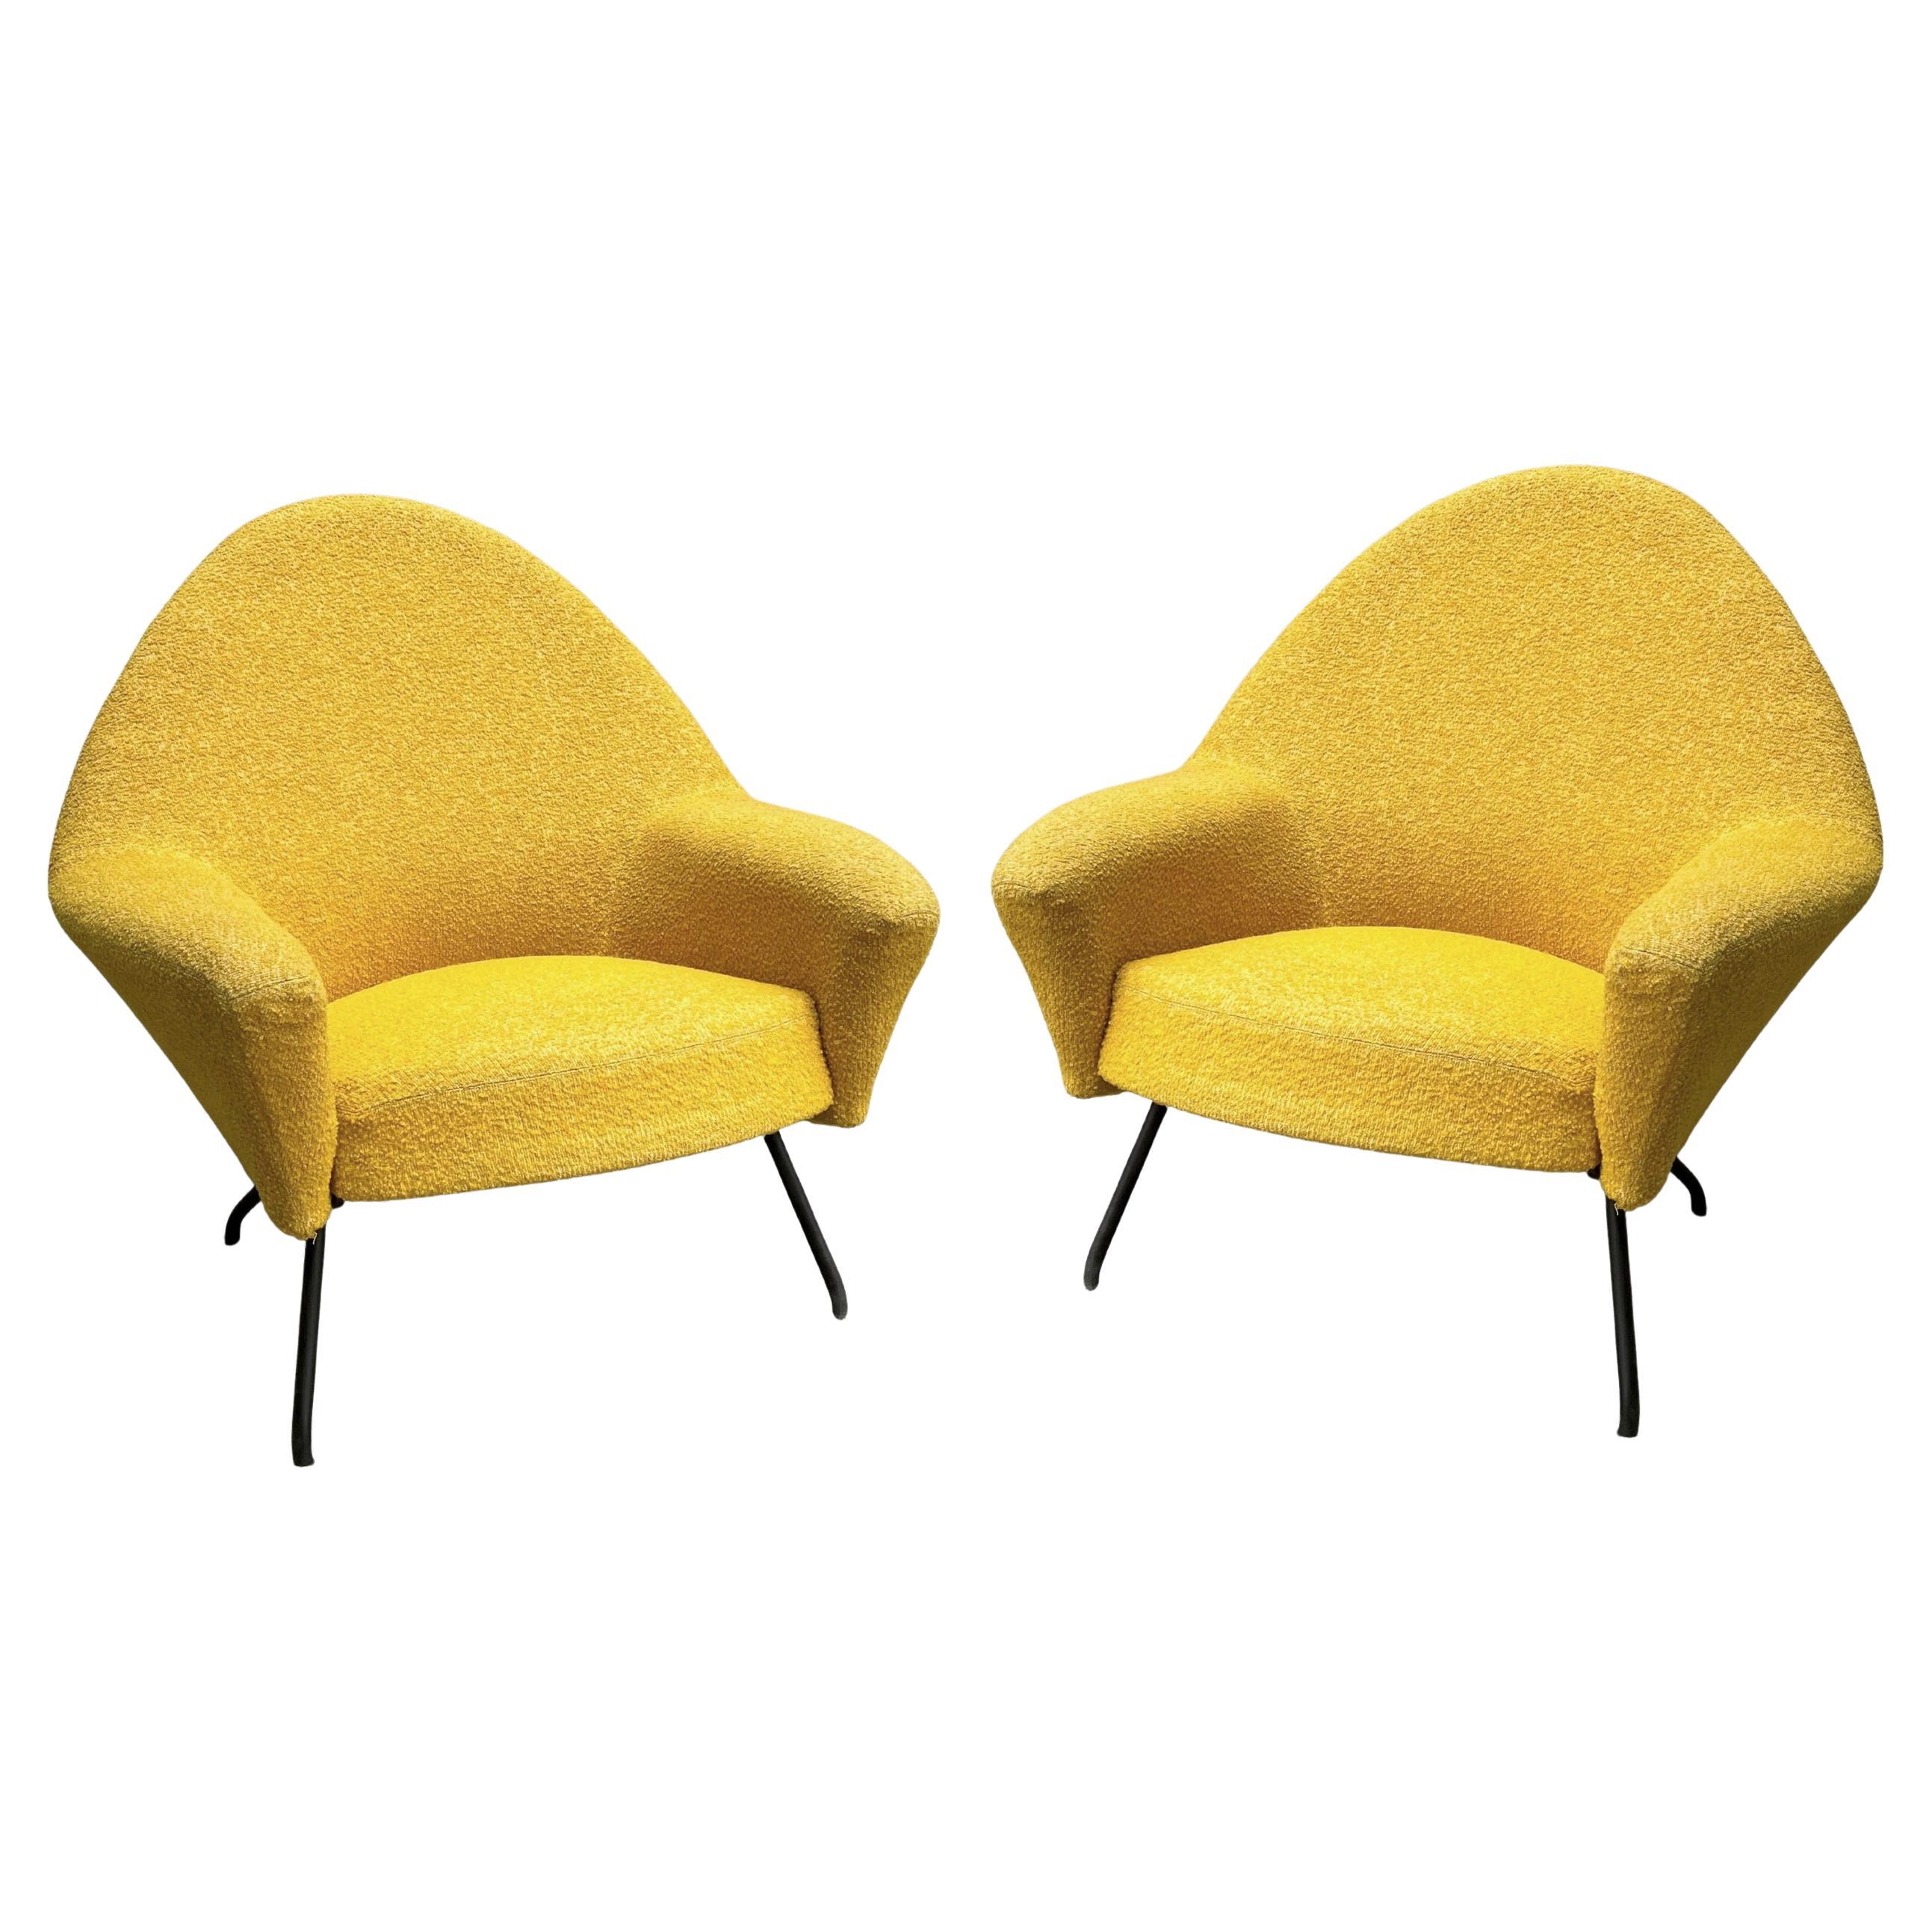 Pair of model 770 armchairs by Joseph-André Motte Ed. Steiner, France circa 1958 For Sale